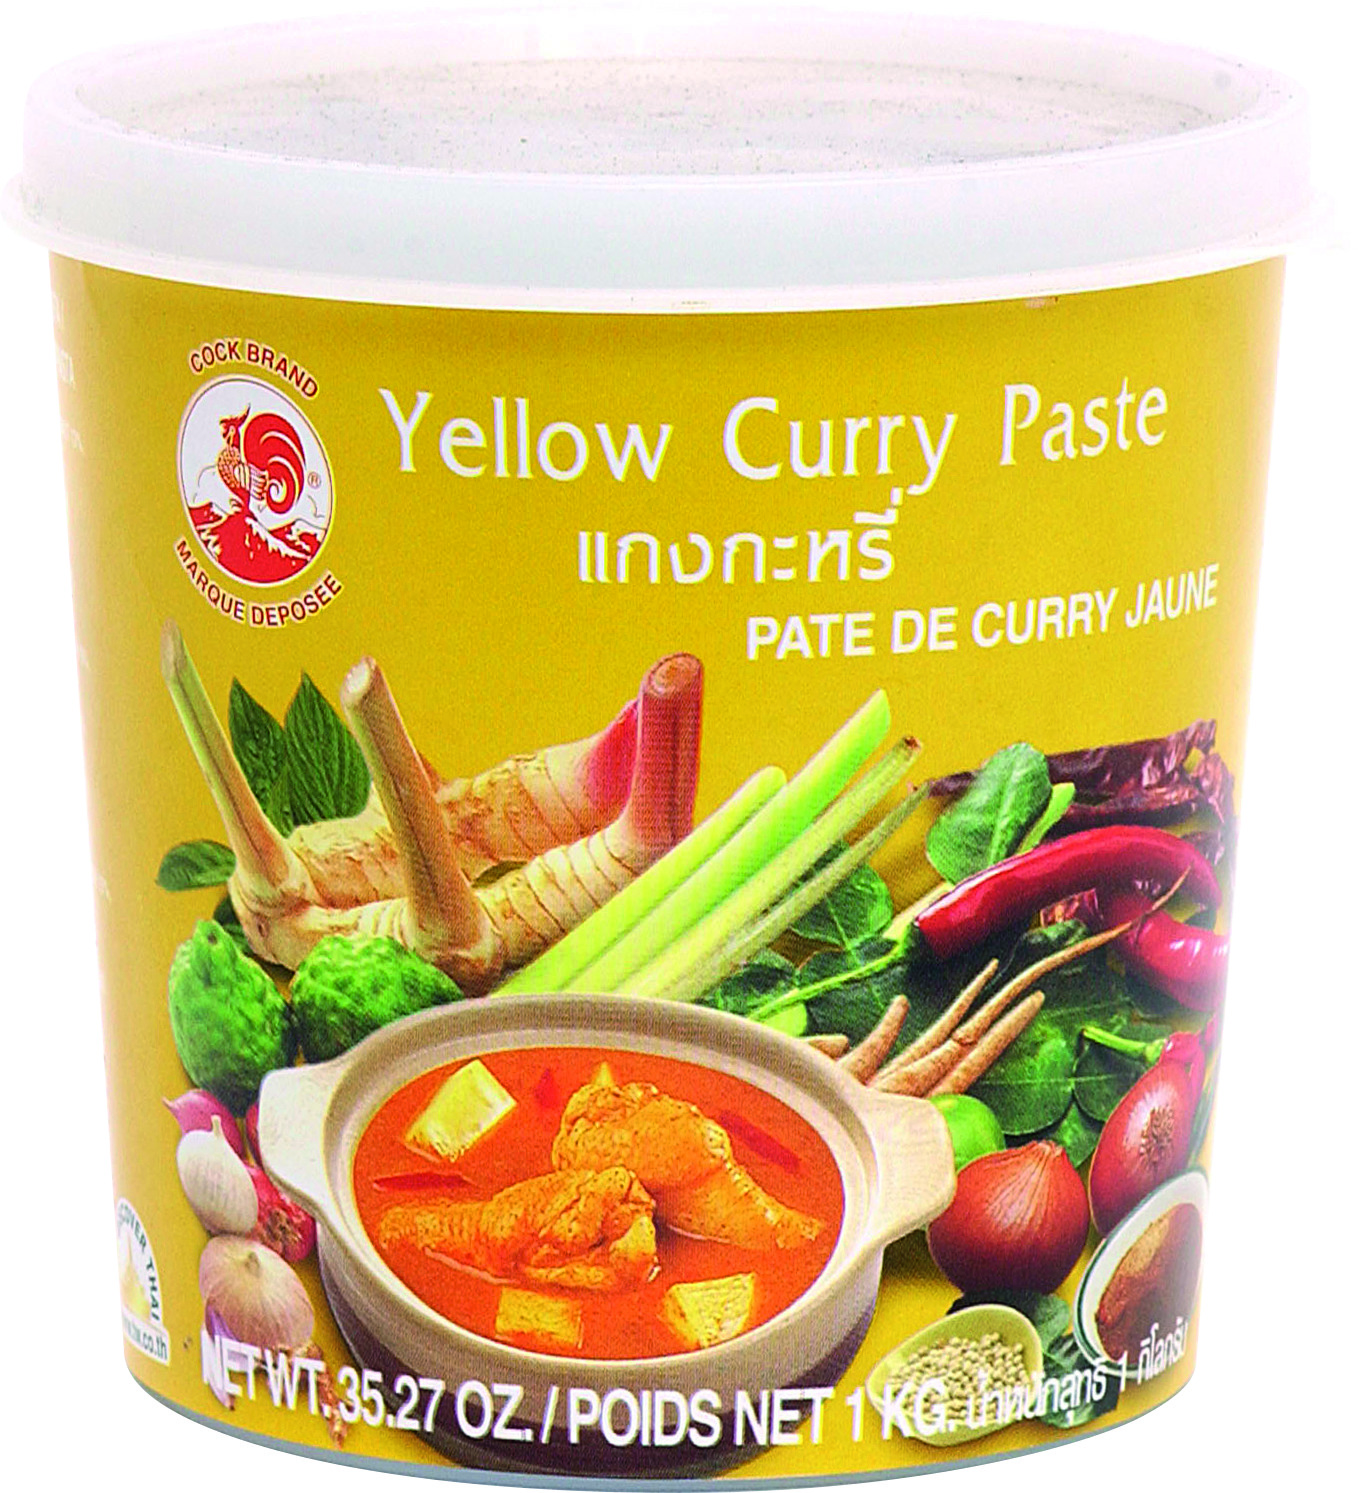 Yellow Curry Paste 12 X 1 Kg - Cock